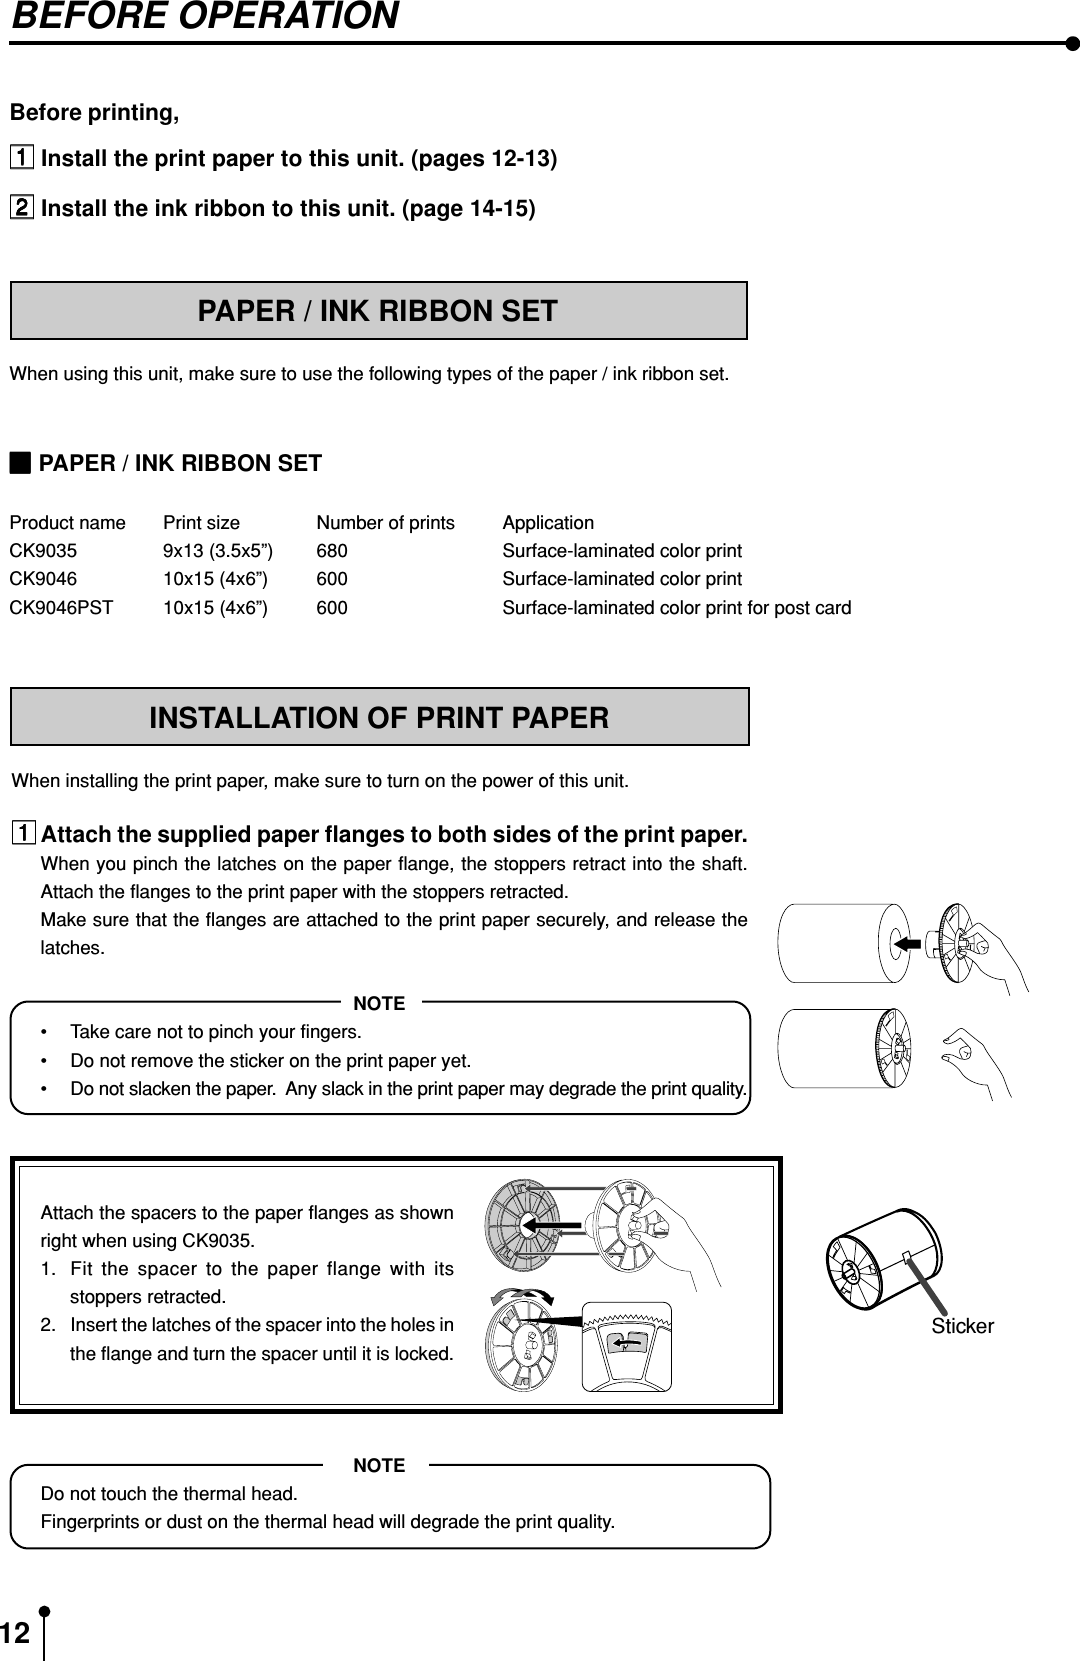 12BEFORE OPERATIONBefore printing, Install the print paper to this unit. (pages 12-13) Install the ink ribbon to this unit. (page 14-15)PAPER / INK RIBBON SETWhen using this unit, make sure to use the following types of the paper / ink ribbon set.INSTALLATION OF PRINT PAPERWhen installing the print paper, make sure to turn on the power of this unit.Attach the supplied paper flanges to both sides of the print paper.When you pinch the latches on the paper flange, the stoppers retract into the shaft.Attach the flanges to the print paper with the stoppers retracted.Make sure that the flanges are attached to the print paper securely, and release thelatches.NOTE•Take care not to pinch your fingers.•Do not remove the sticker on the print paper yet.•Do not slacken the paper.  Any slack in the print paper may degrade the print quality.Attach the spacers to the paper flanges as shownright when using CK9035.1. Fit the spacer to the paper flange with itsstoppers retracted.2. Insert the latches of the spacer into the holes inthe flange and turn the spacer until it is locked.NOTEDo not touch the thermal head.Fingerprints or dust on the thermal head will degrade the print quality.Sticker PAPER / INK RIBBON SETProduct name Print size Number of prints ApplicationCK9035 9x13 (3.5x5”) 680 Surface-laminated color printCK9046 10x15 (4x6”) 600 Surface-laminated color printCK9046PST 10x15 (4x6”) 600 Surface-laminated color print for post card